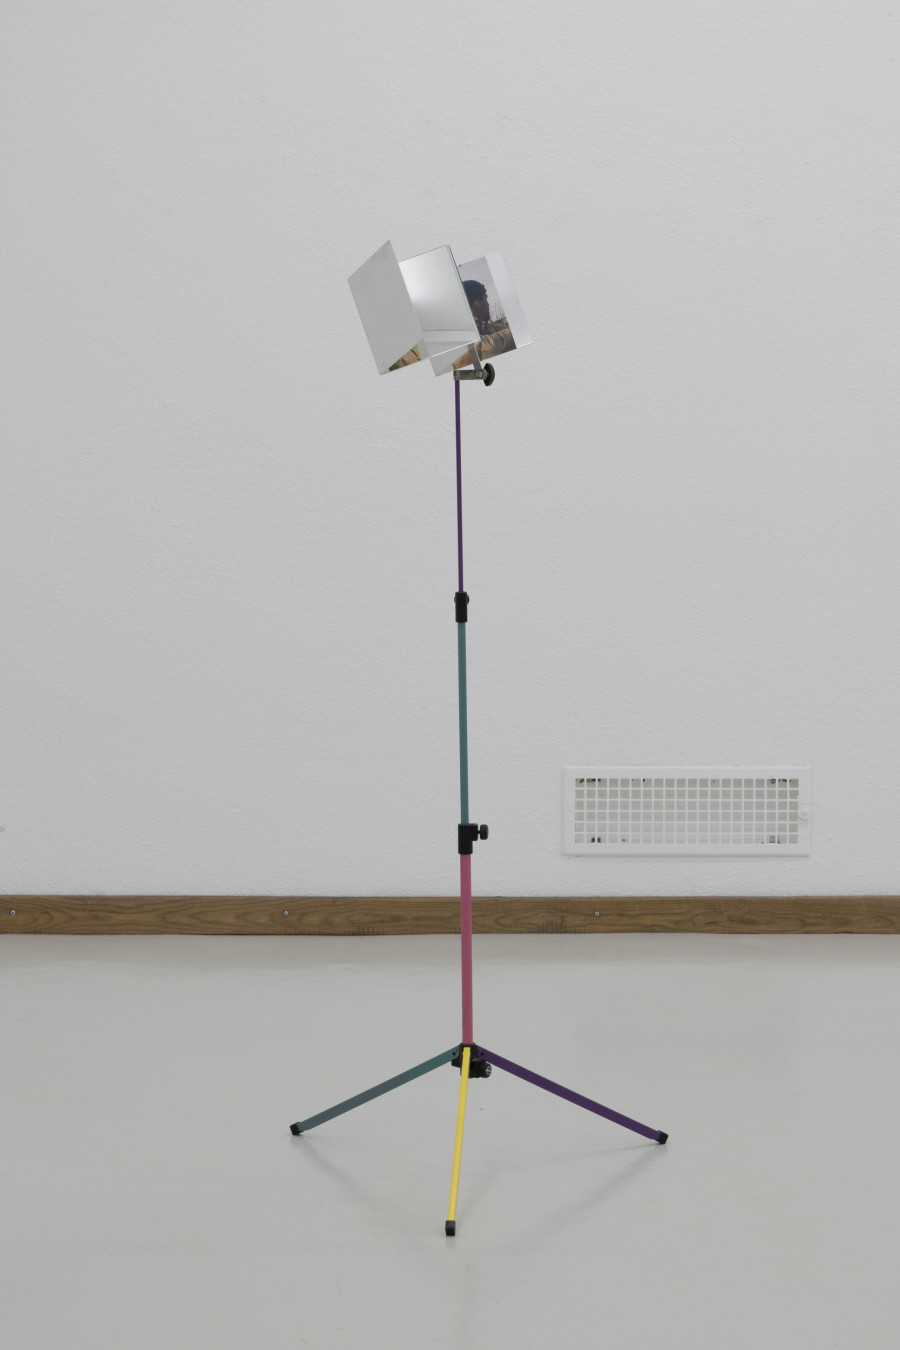 Emanuel Rossetti, Linus, 2024. Two digital c-prints on Fuji Crystal Archive paper, mounted on aluminum, mirrors, music-stand, 140 x 30 x 25 cm. Emanuel Rossetti, Stimmung, installation view, Kunsthaus Glarus, 2024. Photo: Gina Folly. Courtesy of the artist, Karma International, Zurich and Jan Kaps, Cologne.